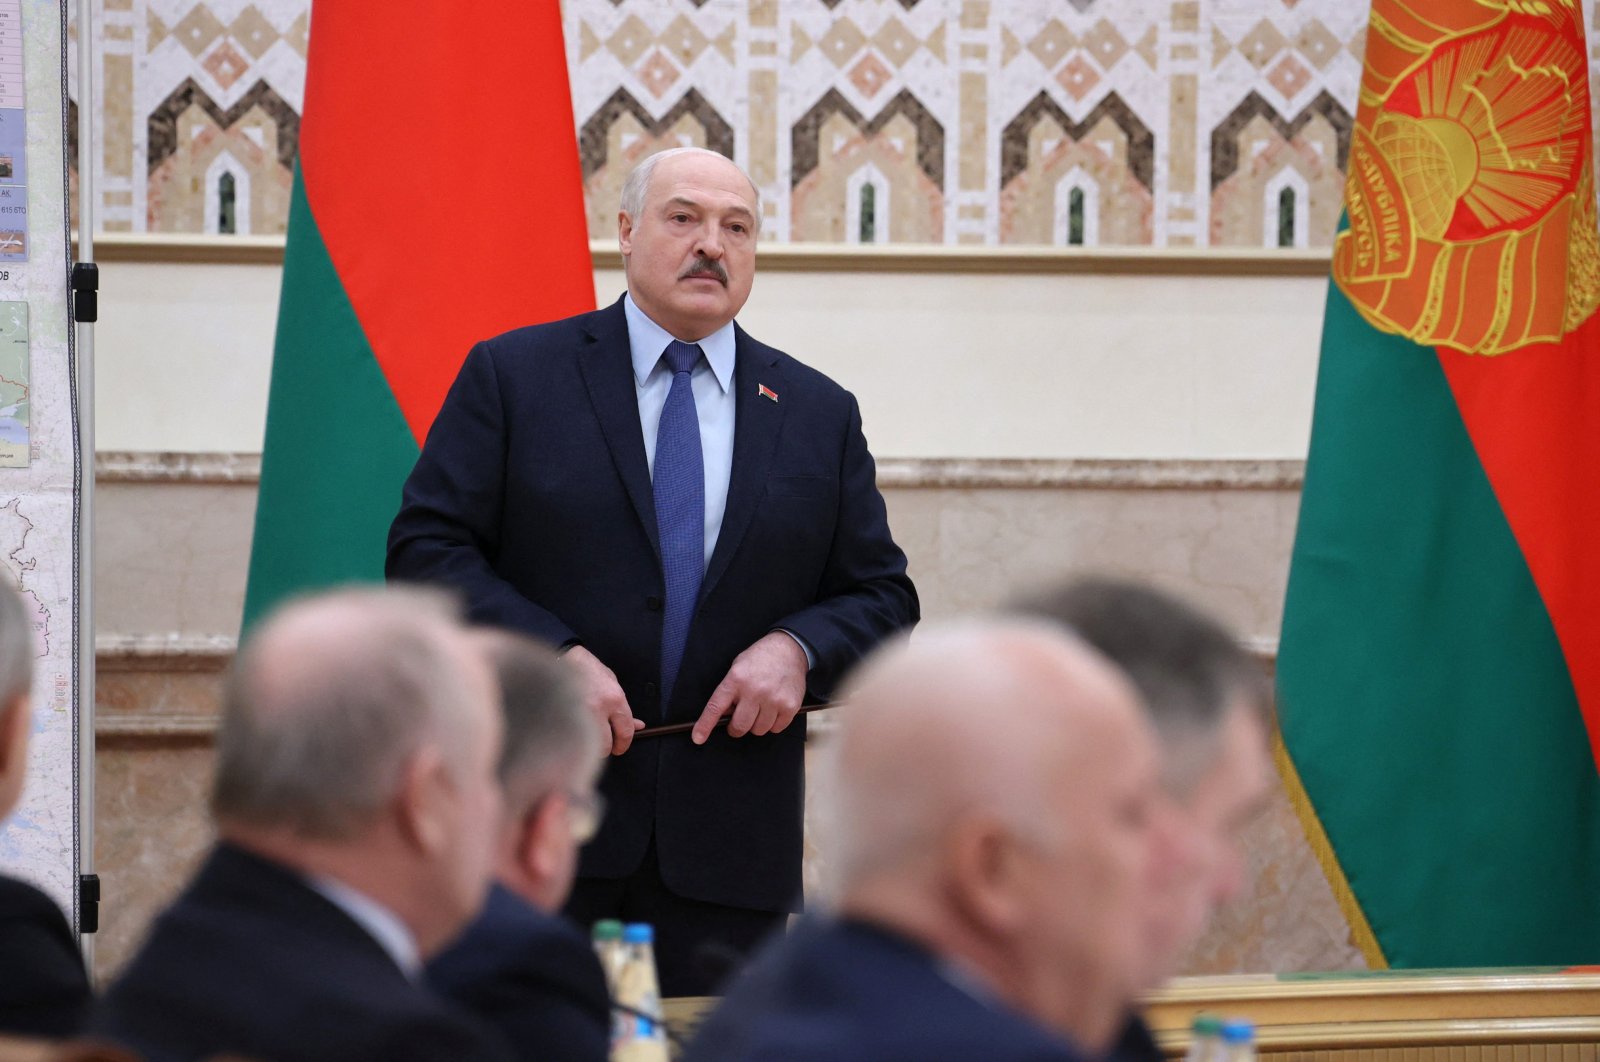 Belarusian President Alexander Lukashenko attends a meeting with members of the Council of Ministers and Security Council in Minsk, Belarus March 1, 2022. (Nikolai Petrov via Belta, Reuters)